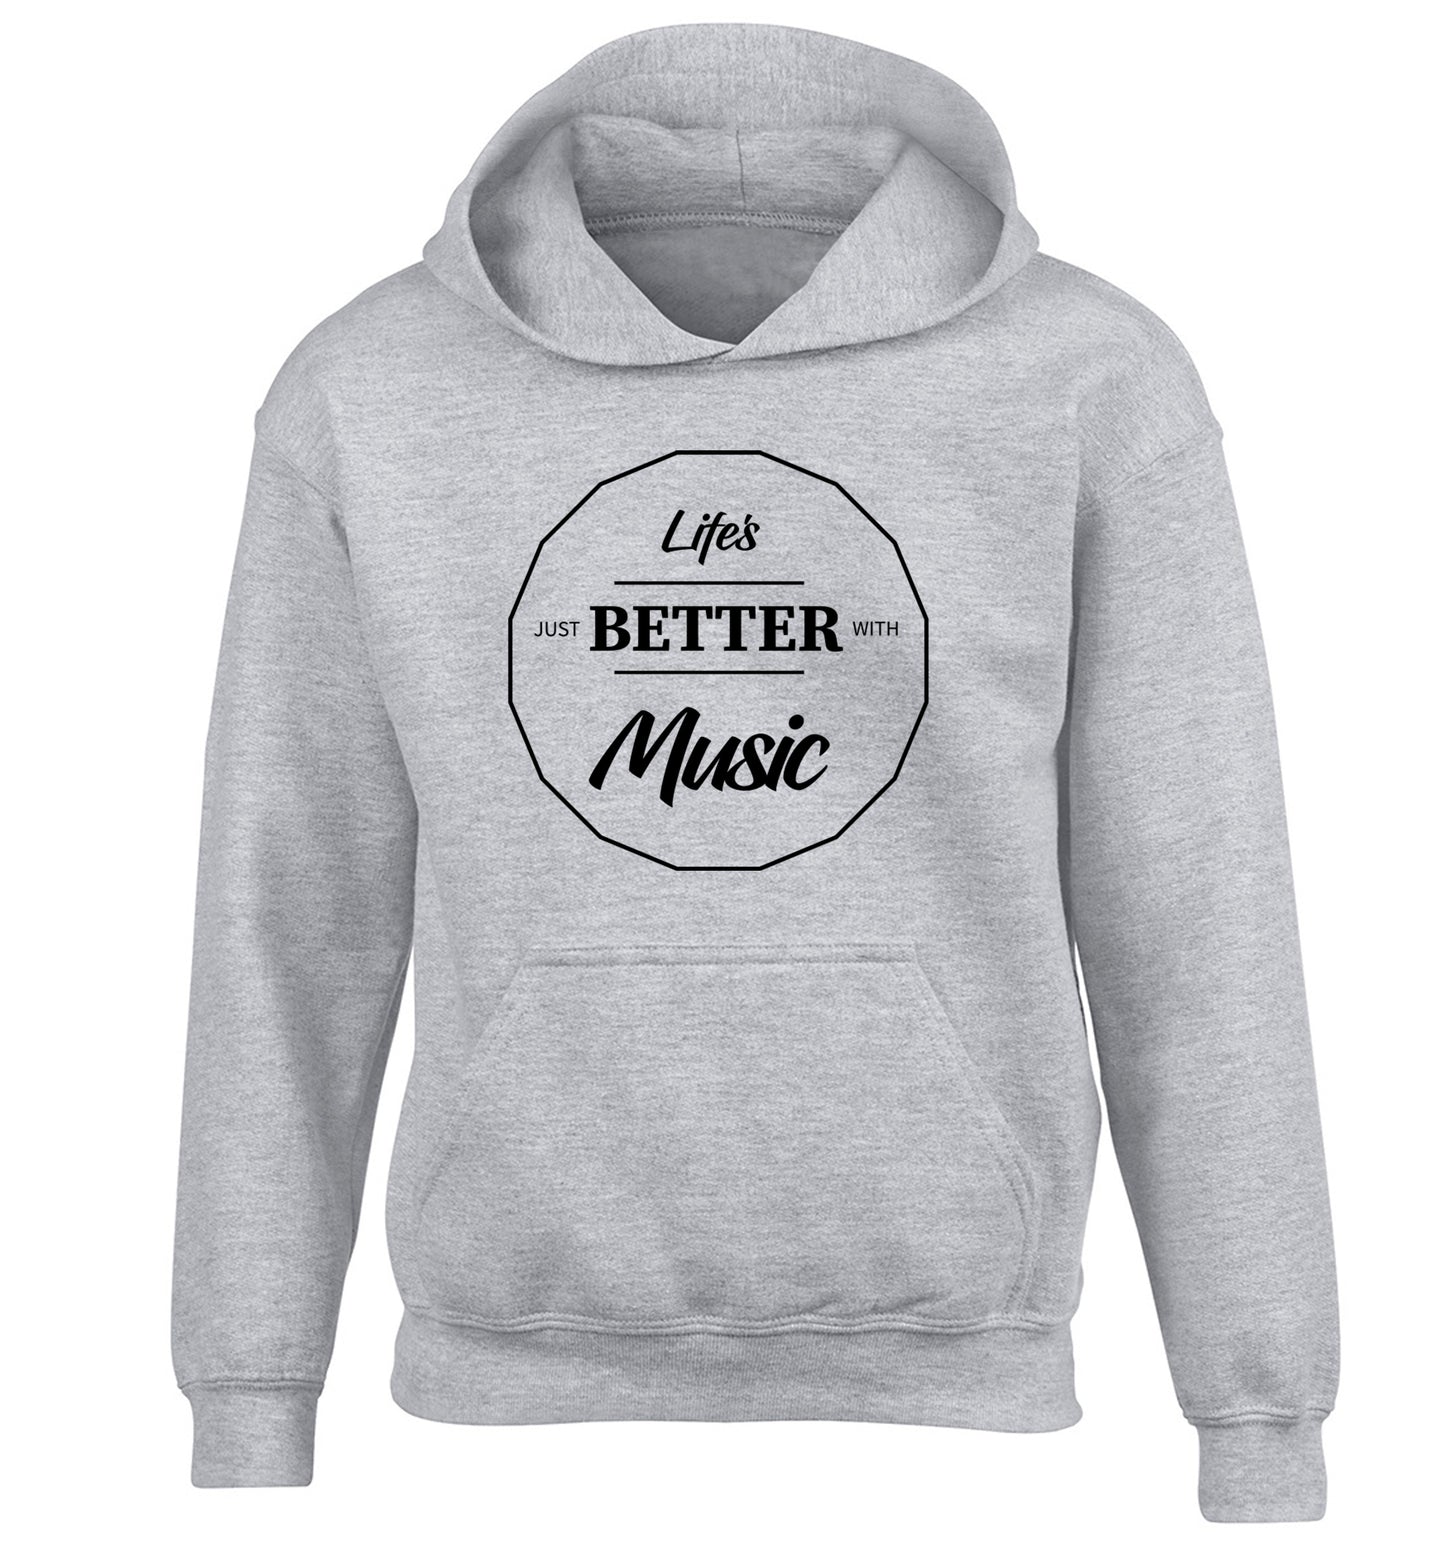 Life is Better With Music children's grey hoodie 12-13 Years